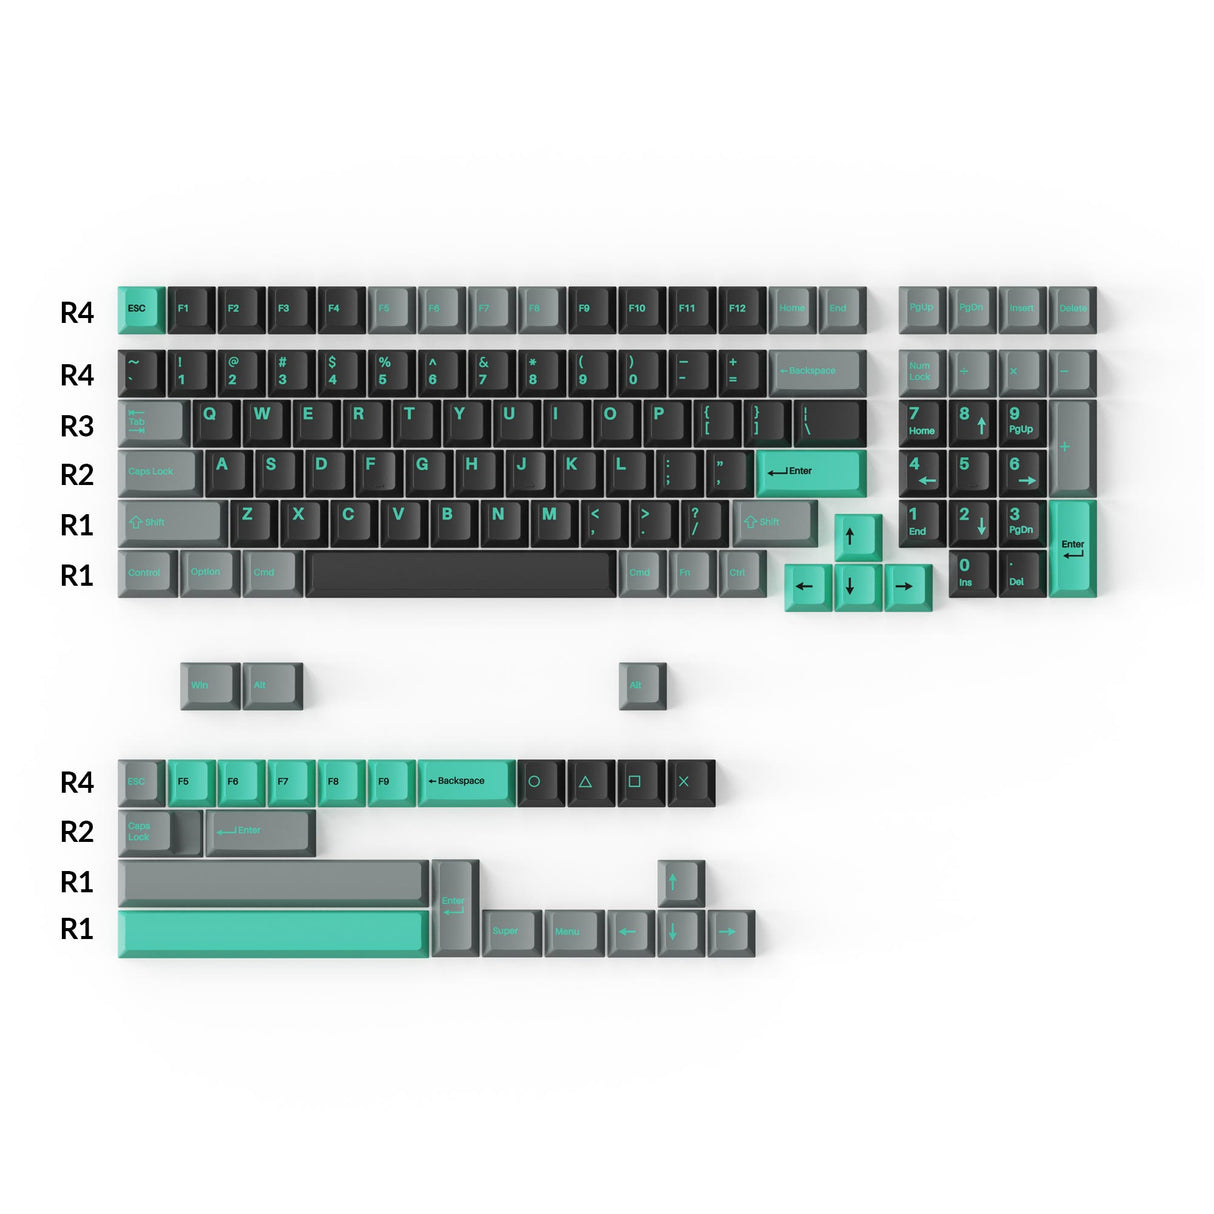 Keychron double shot PBT Cherry profile full set keycap set hacker for ANSI 96% and 75% and 65% layouts